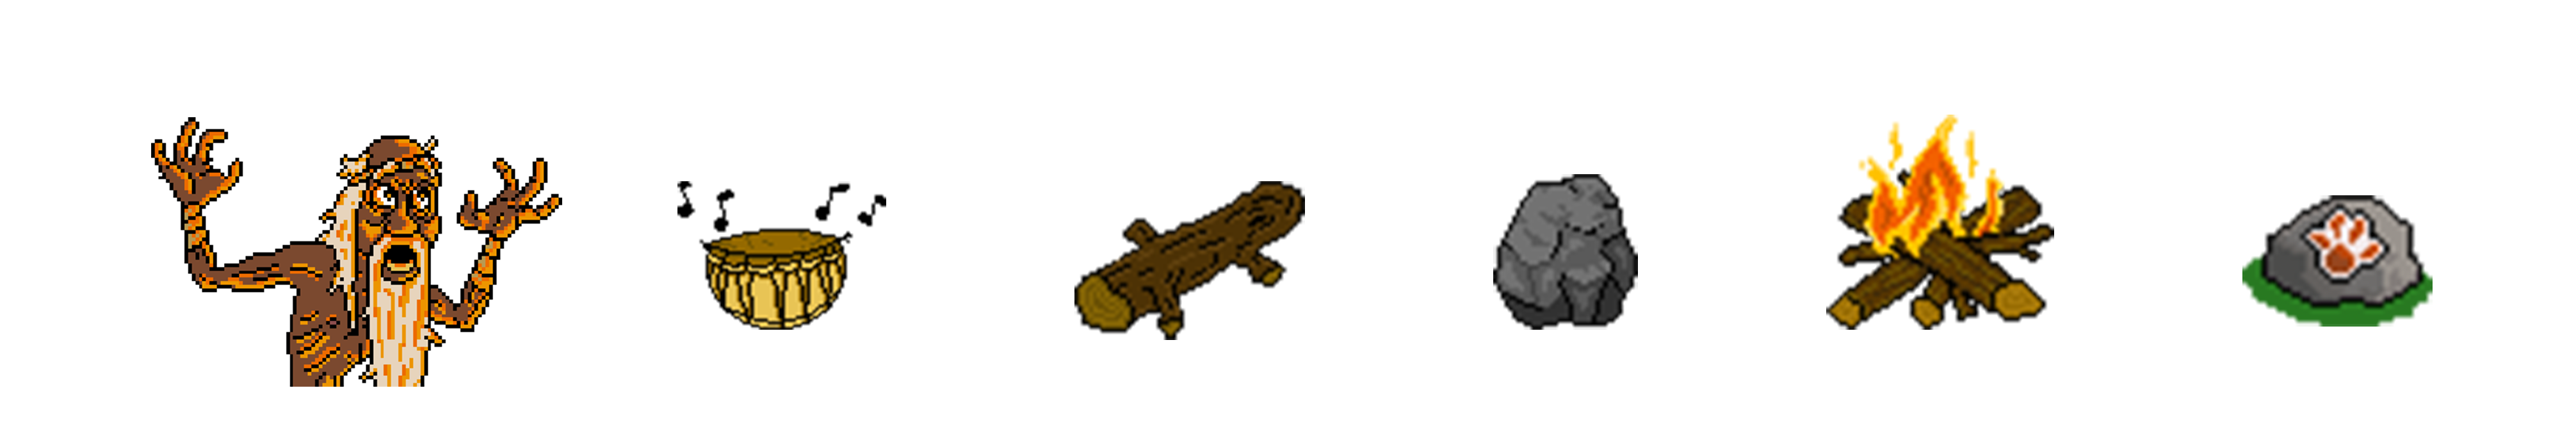 Fig 3 - Set of final 'cavemojis' used to communicate quest to the player and the hand painted stone icon